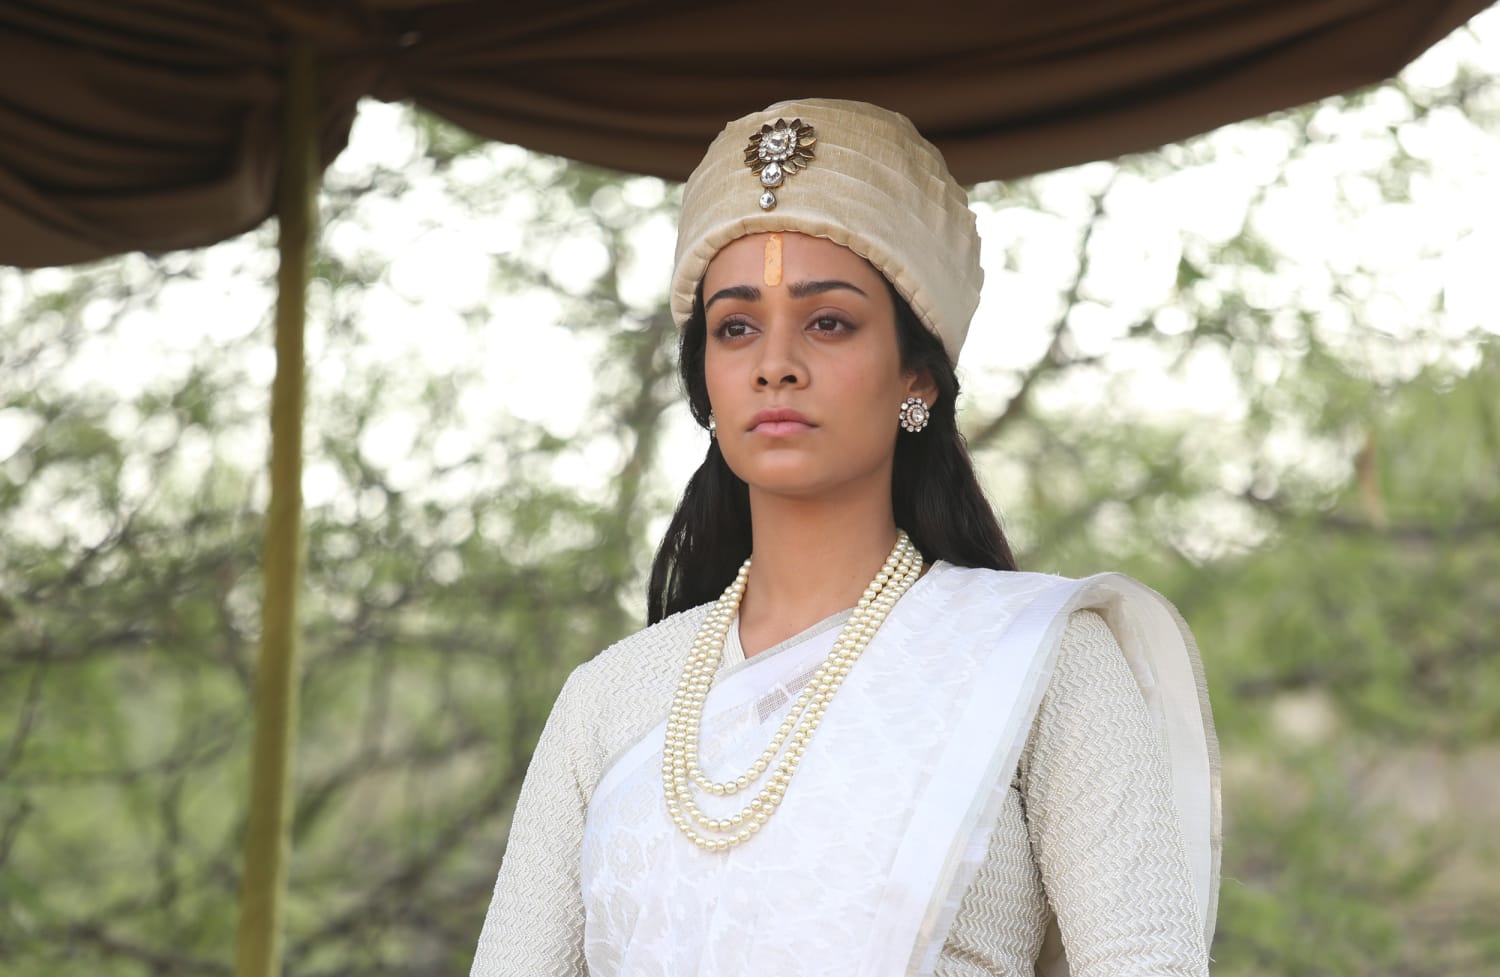 Warrior Queen of Jhansi' brings a legendary Indian royal to the big screen